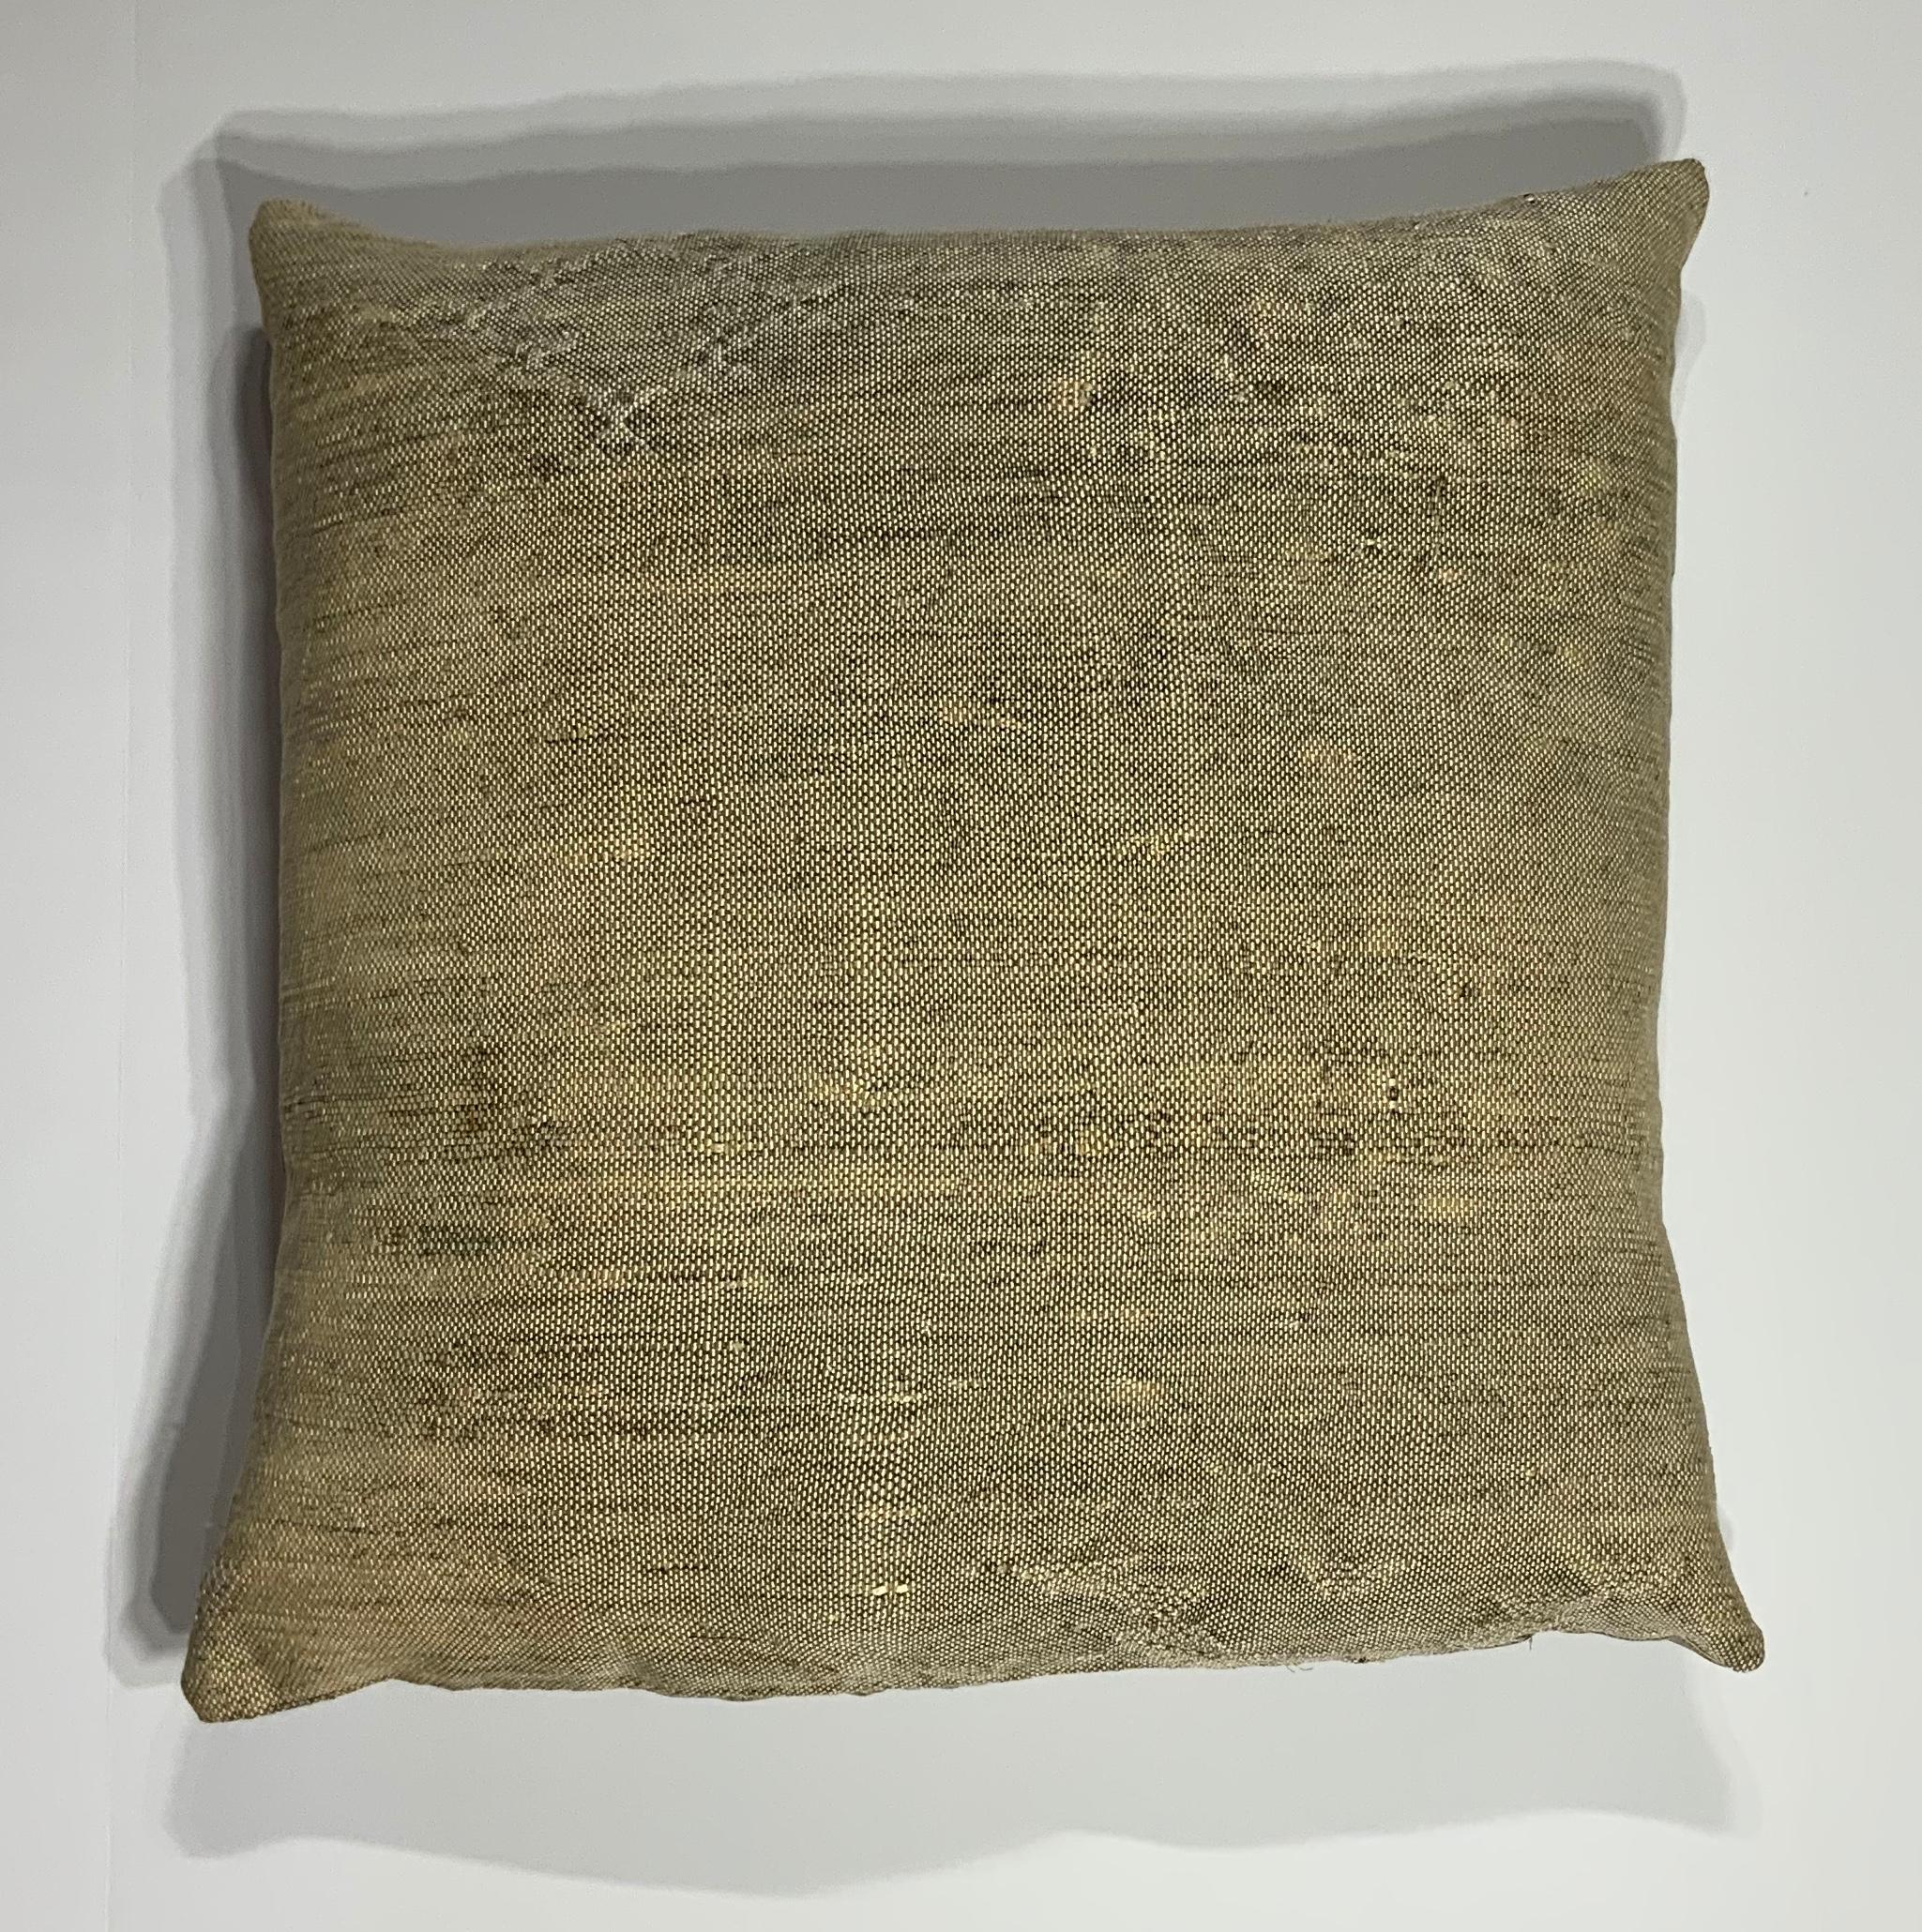 Beautiful pillow made of handwoven flat-weave rug fragment, cream camel color with geometric motif, silk backing, fresh down and feather insert.